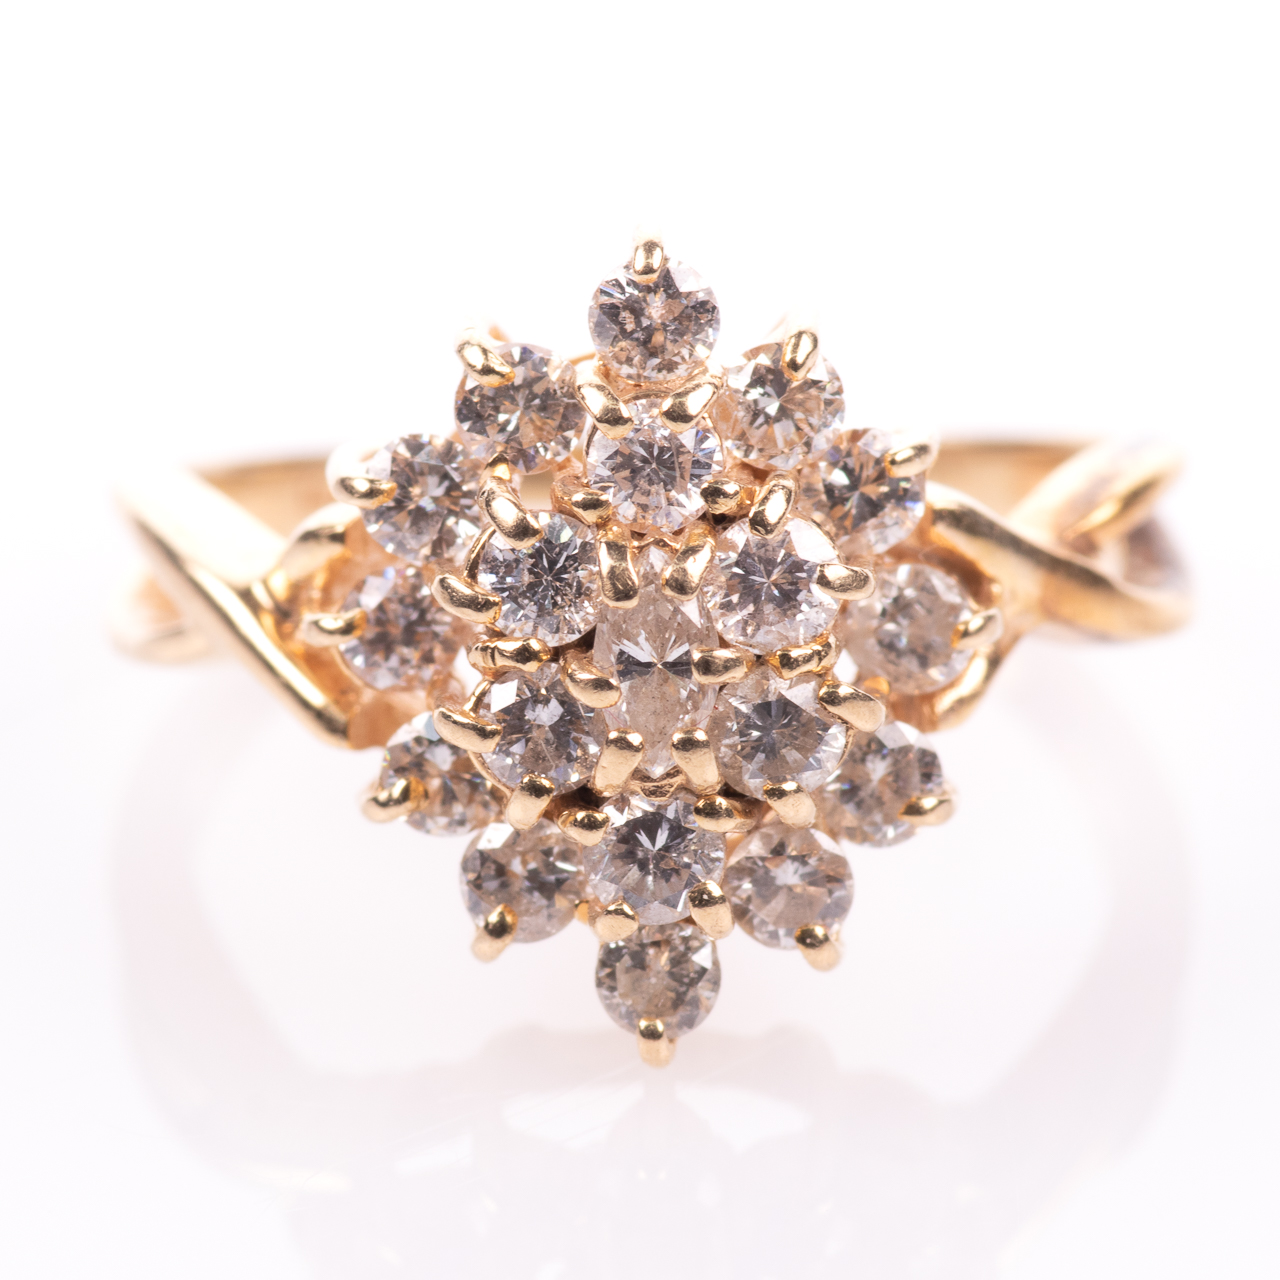 14ct Gold 1.55ct Diamond Cluster Ring - Image 3 of 7